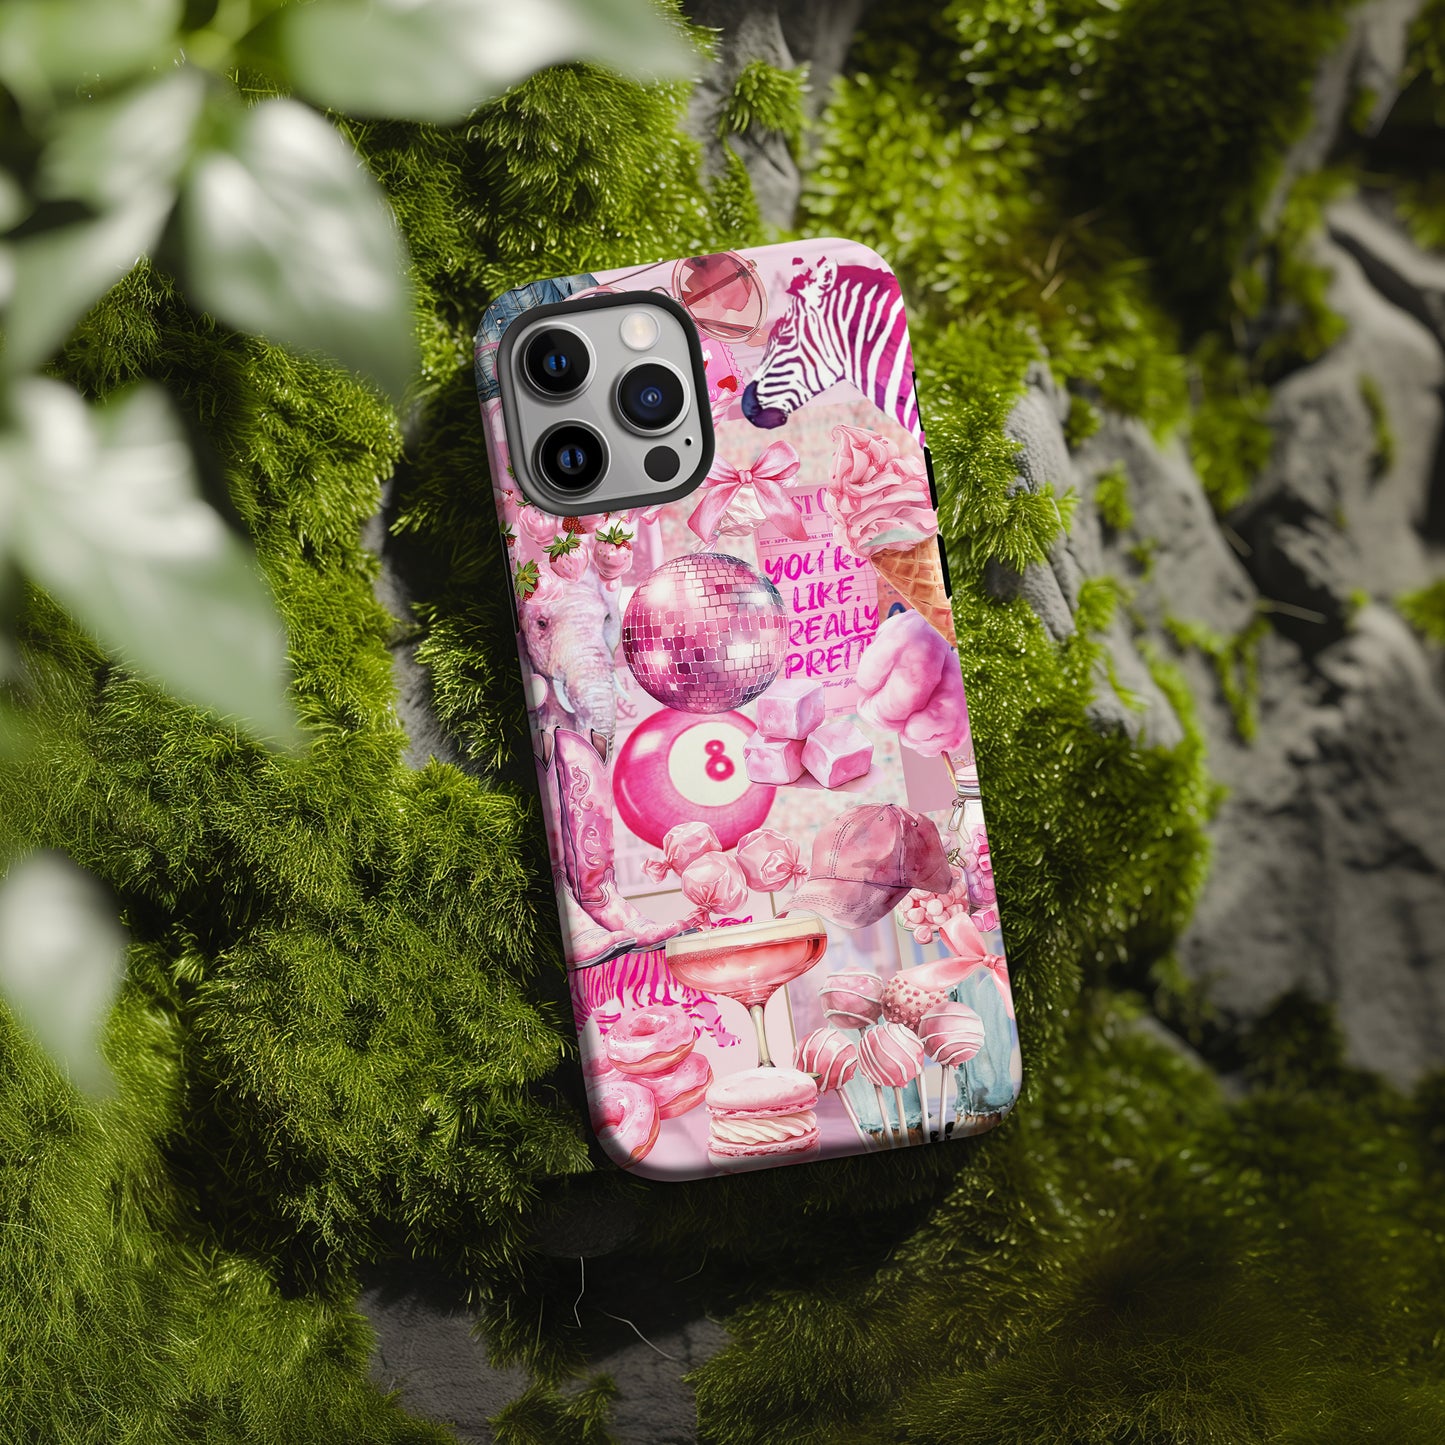 Moss rock with pink collage phone case by Artscape Market